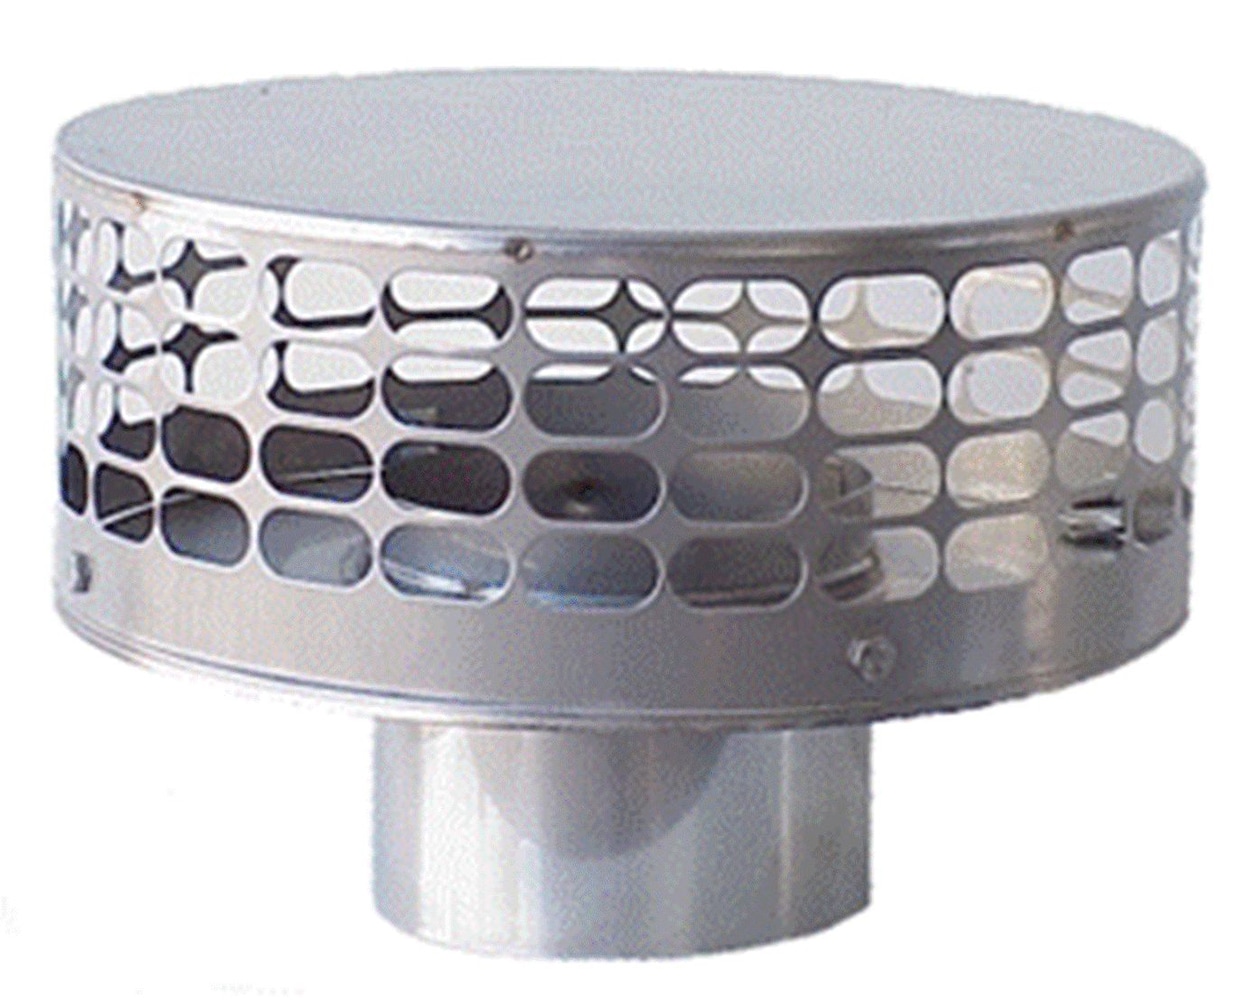 Stainless Steel Round Chimney Cap Vent 6 Inch Resistance Protects Rain Sparks 